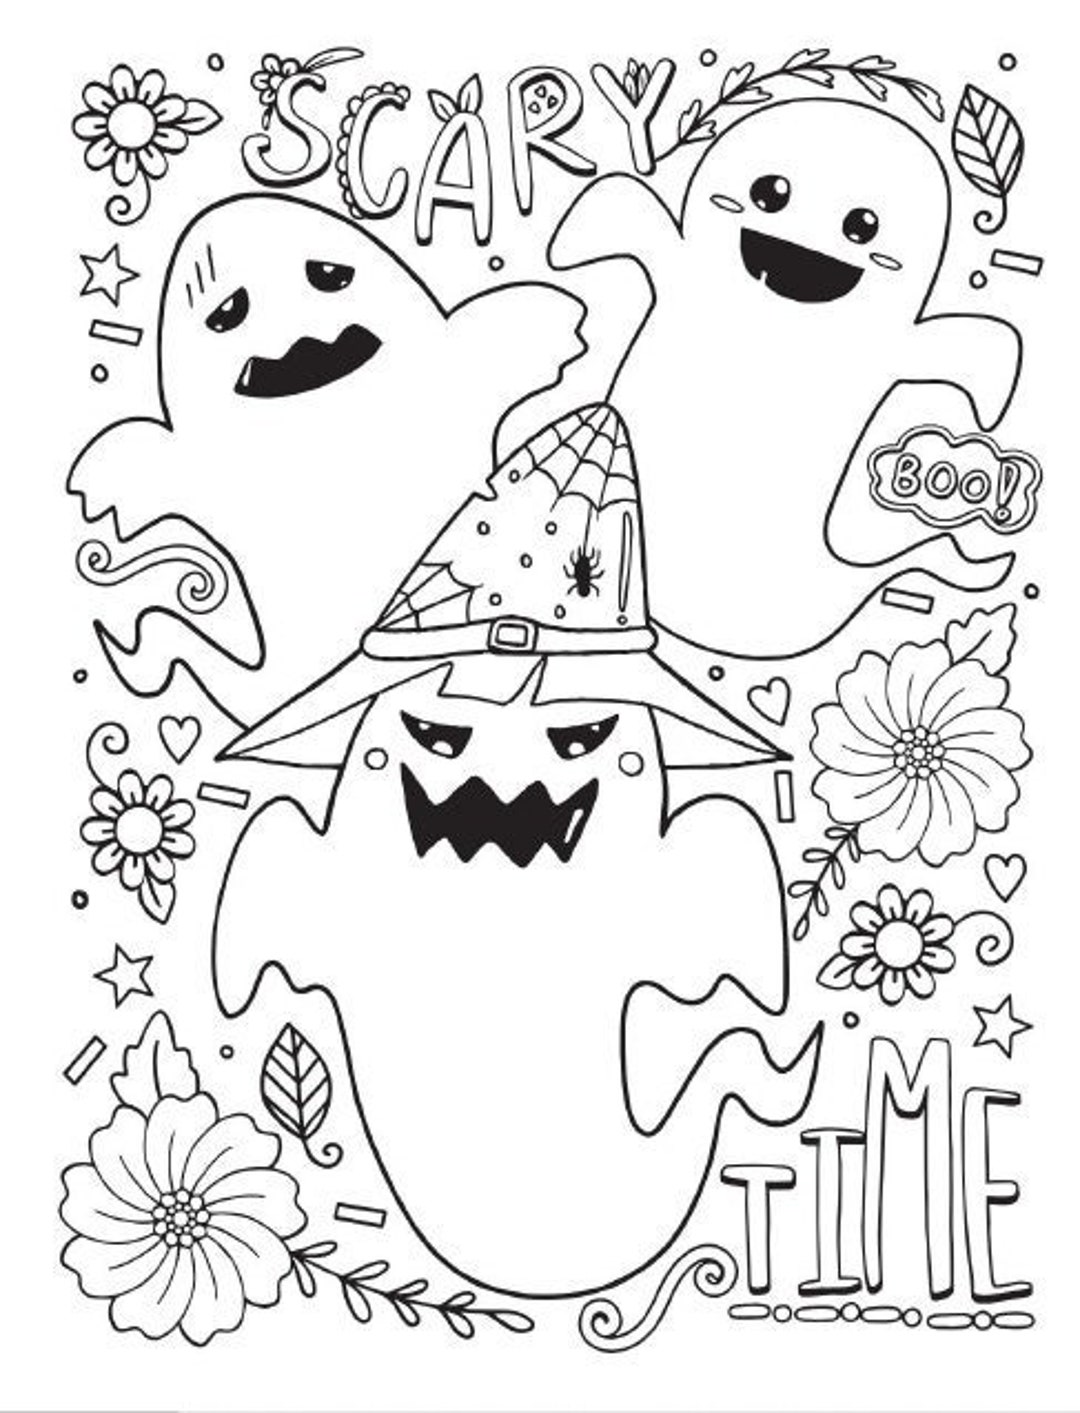 Halloween Coloring Pages and Activites - Etsy